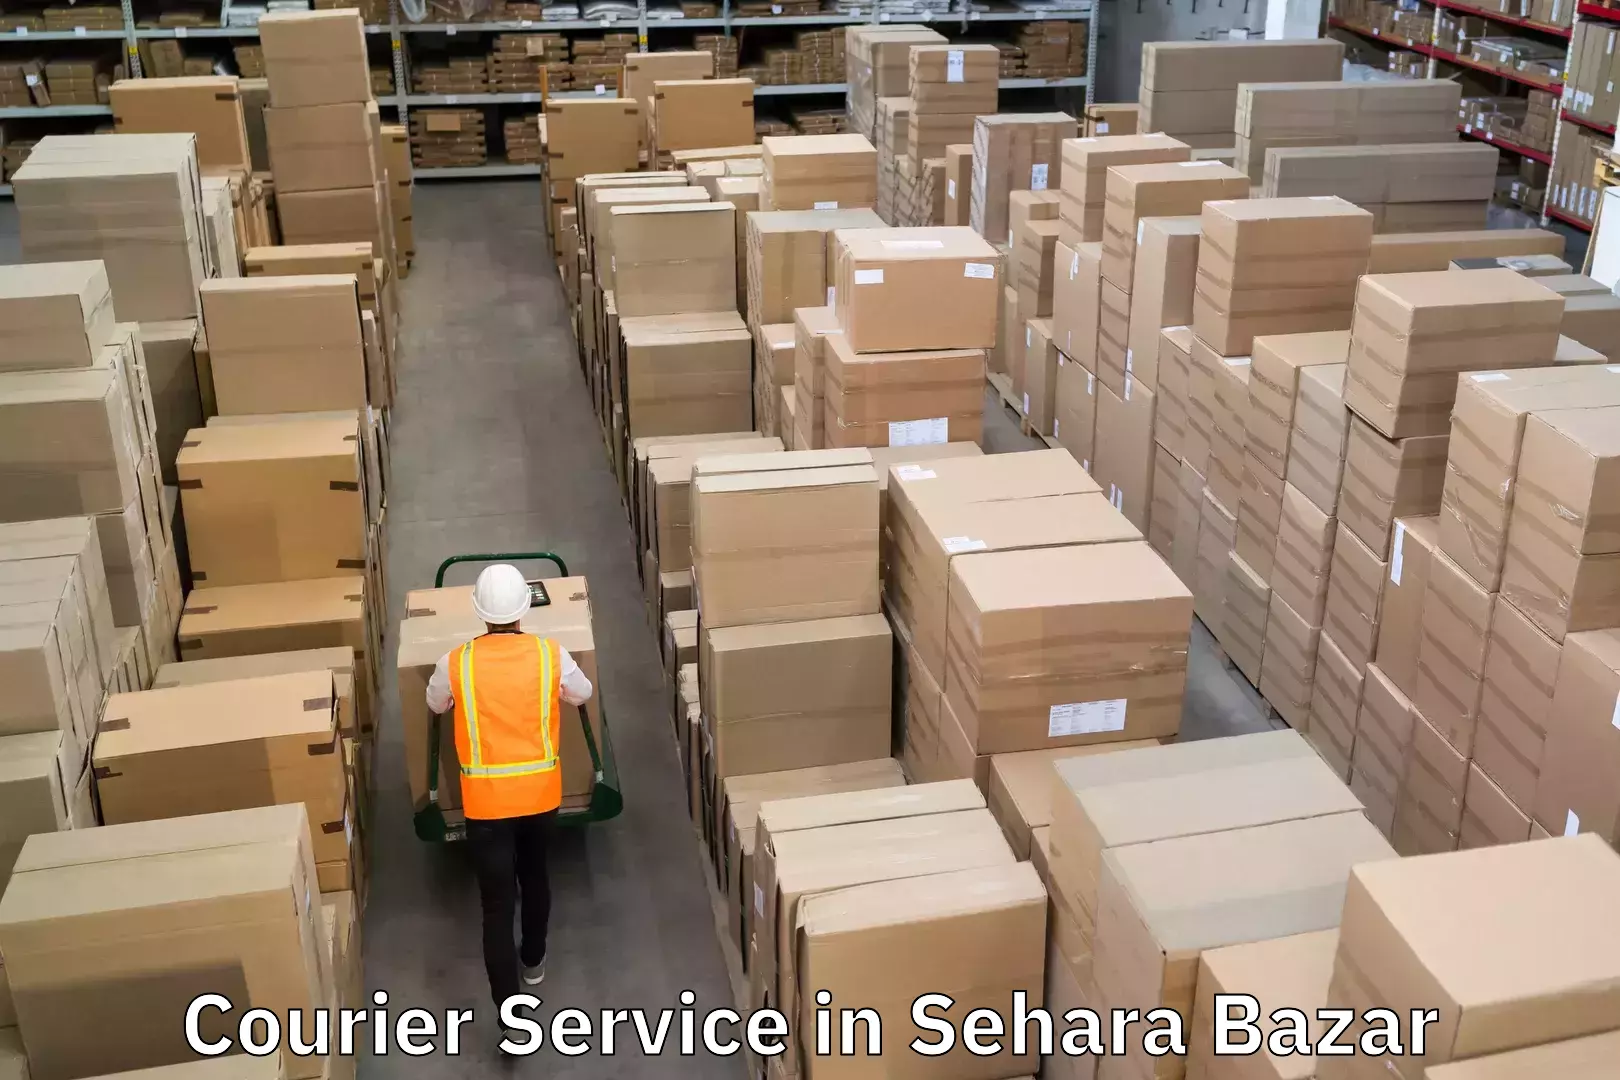 Fast shipping solutions in Sehara Bazar